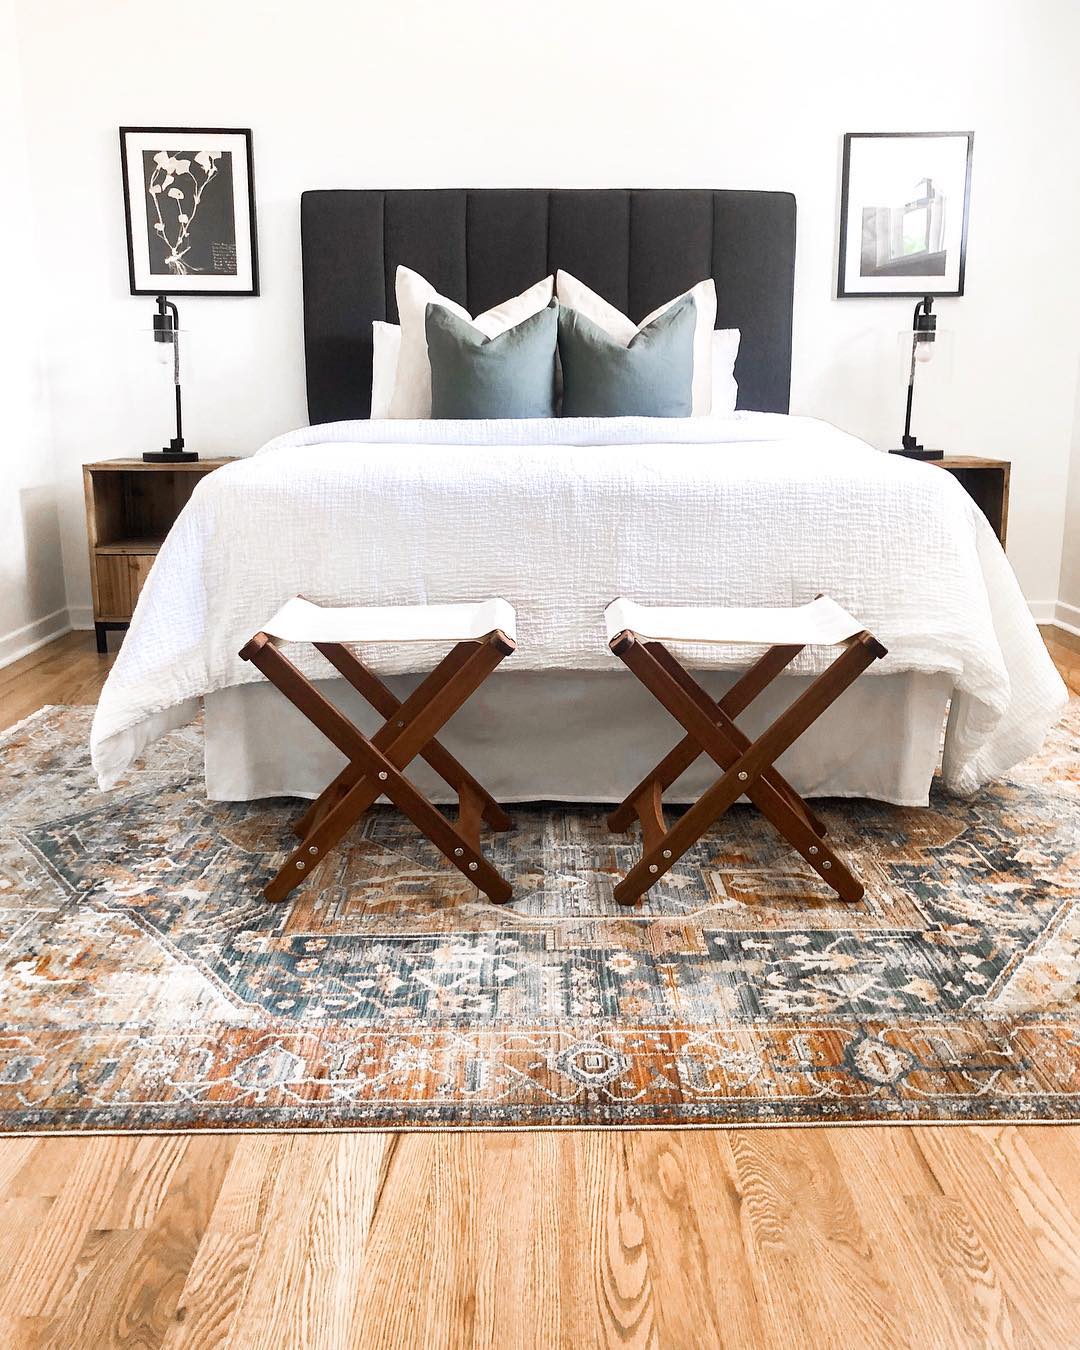 Staged contemporary bedroom. Photo by Instagram user @sagewoodinteriors